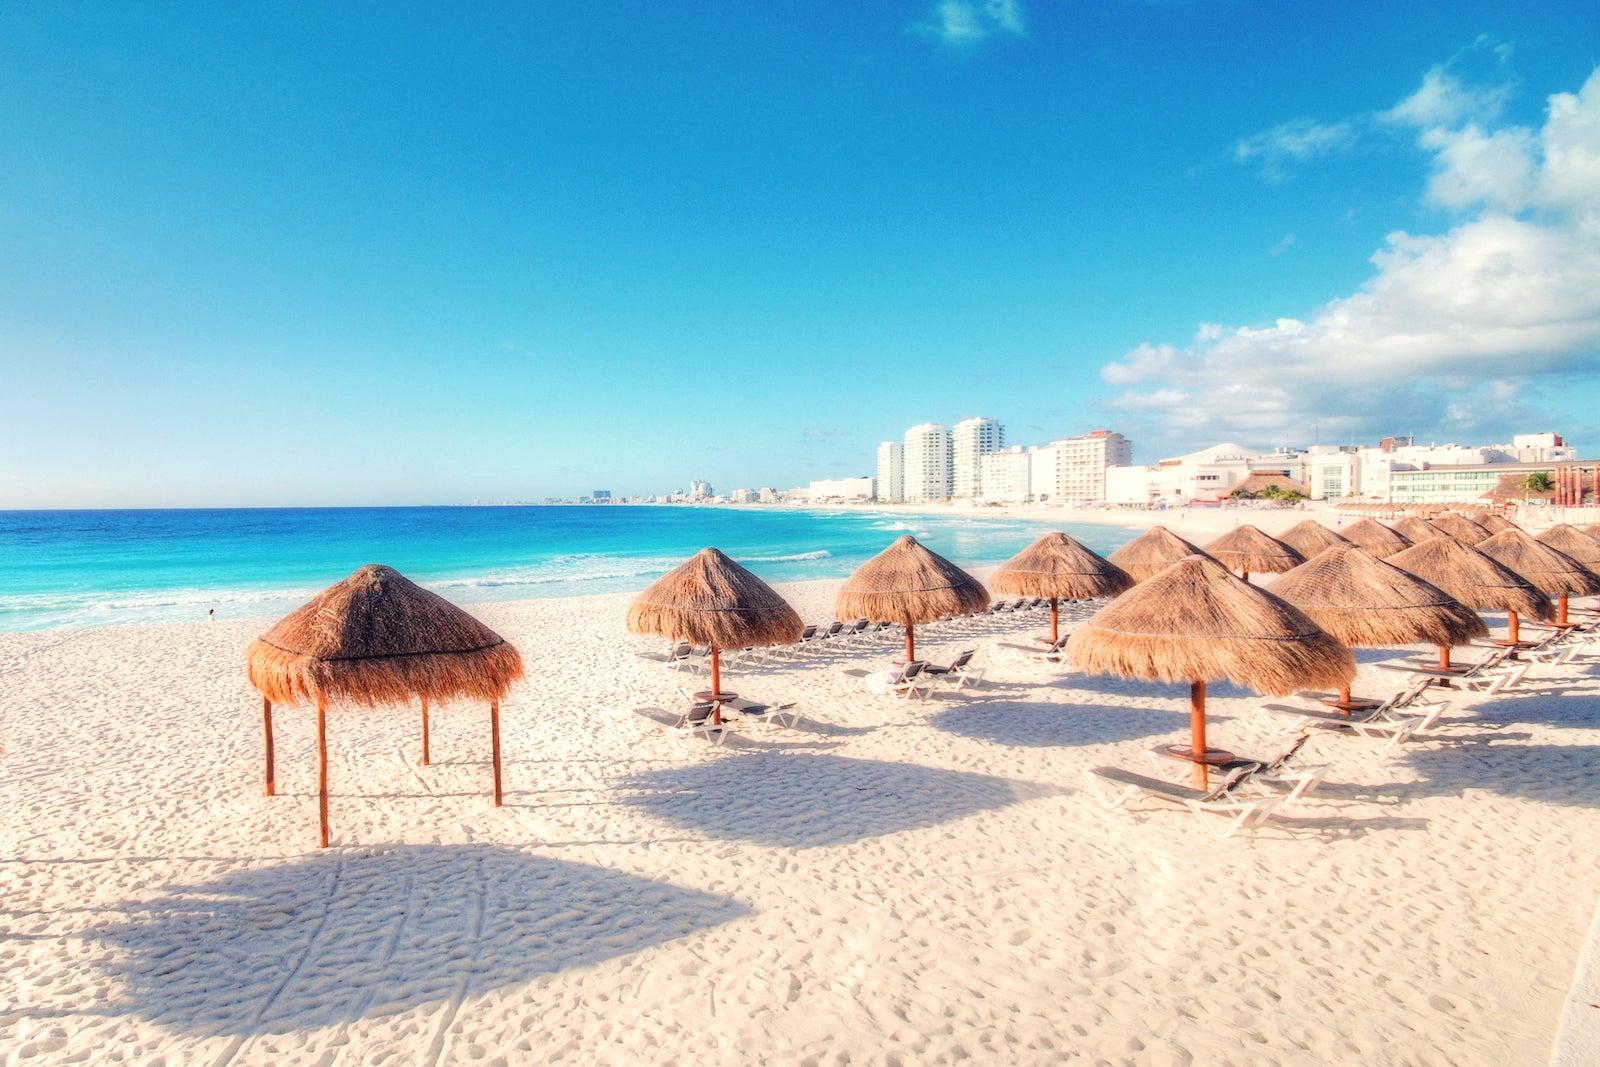 mexico deal alert: fly to cancun, cozumel, merida and tulum from $223 round-trip